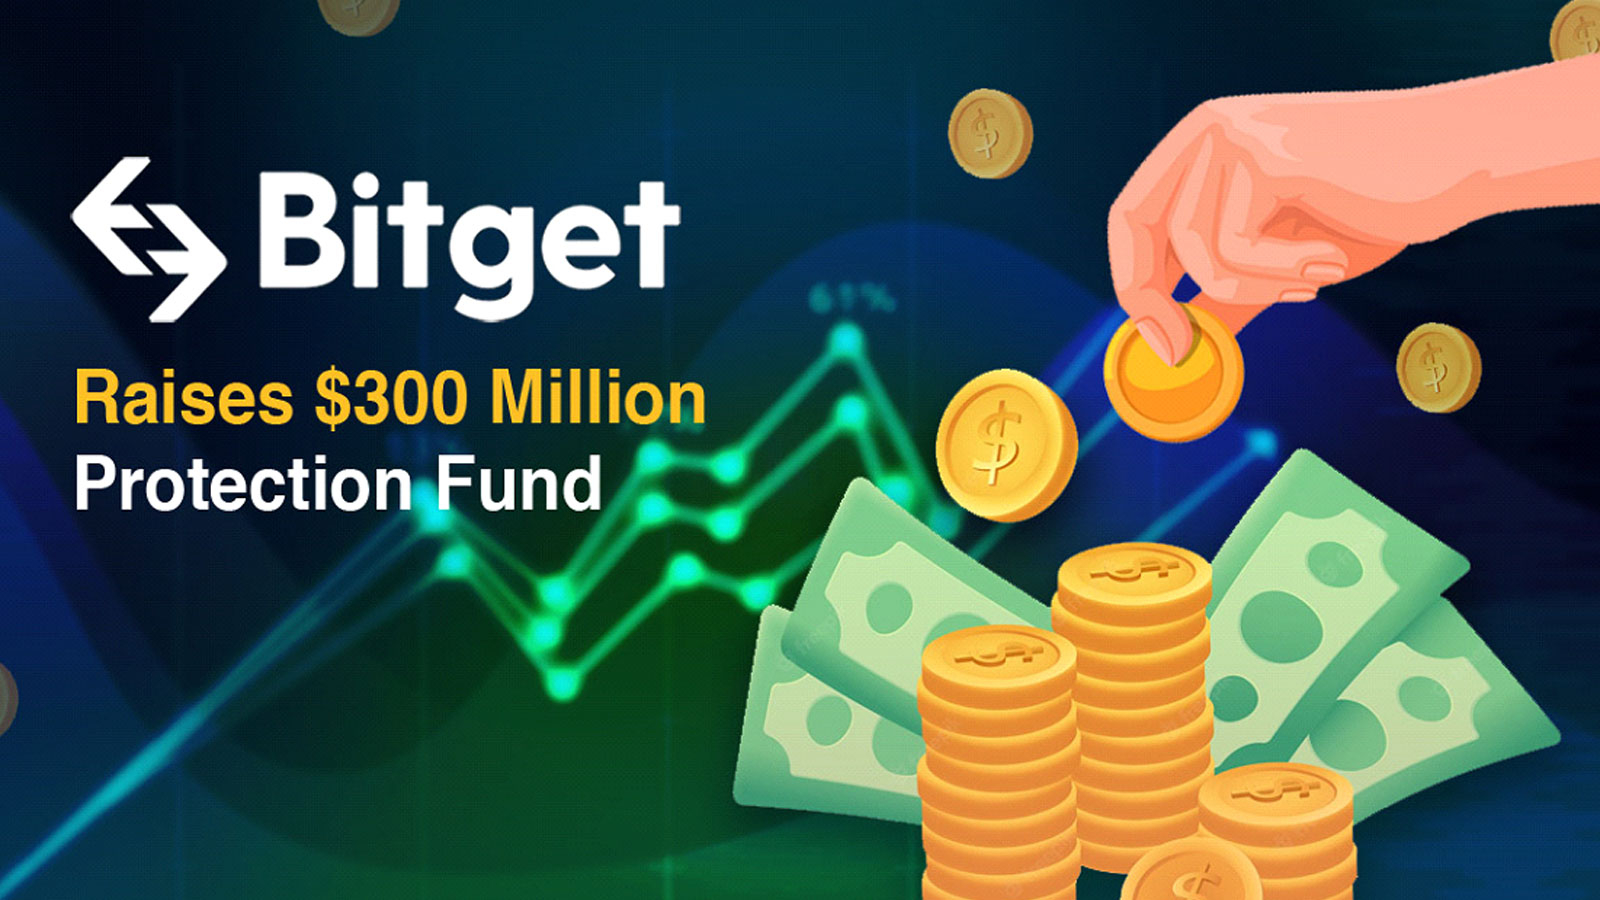 Bitget Raises Its Protection Fund to $300M to Reassure Users after FTX's Collapse